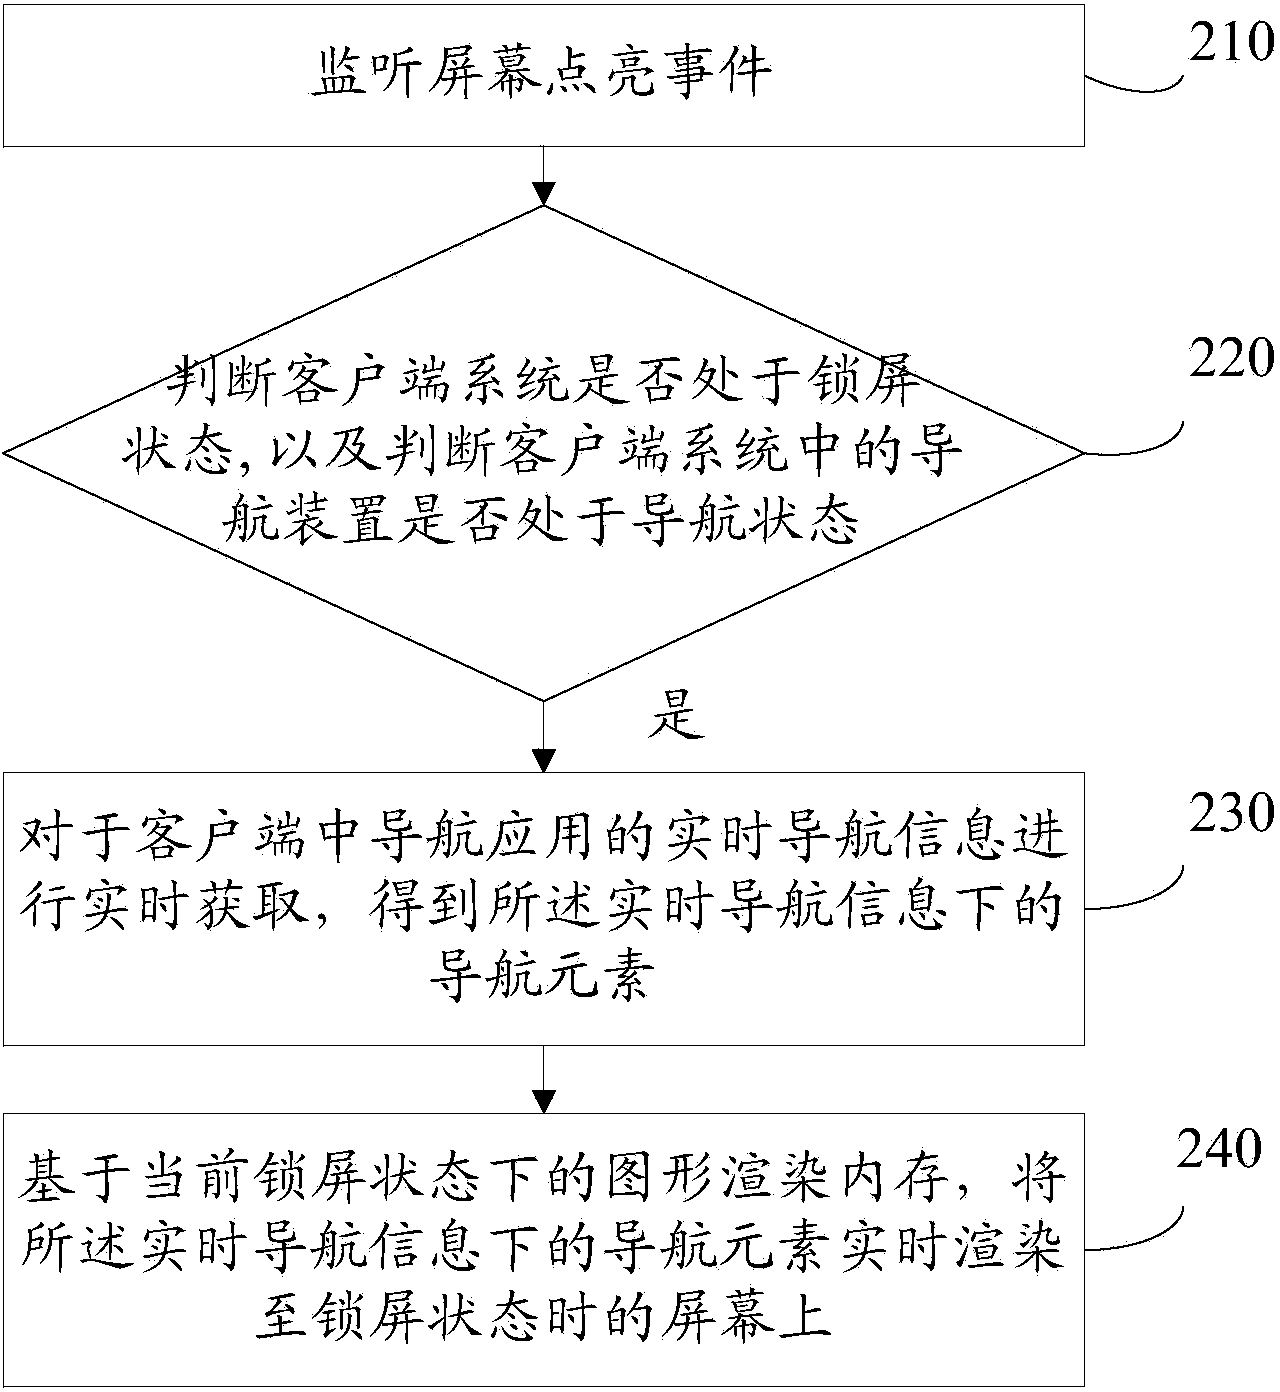 Method and device for display of navigation information